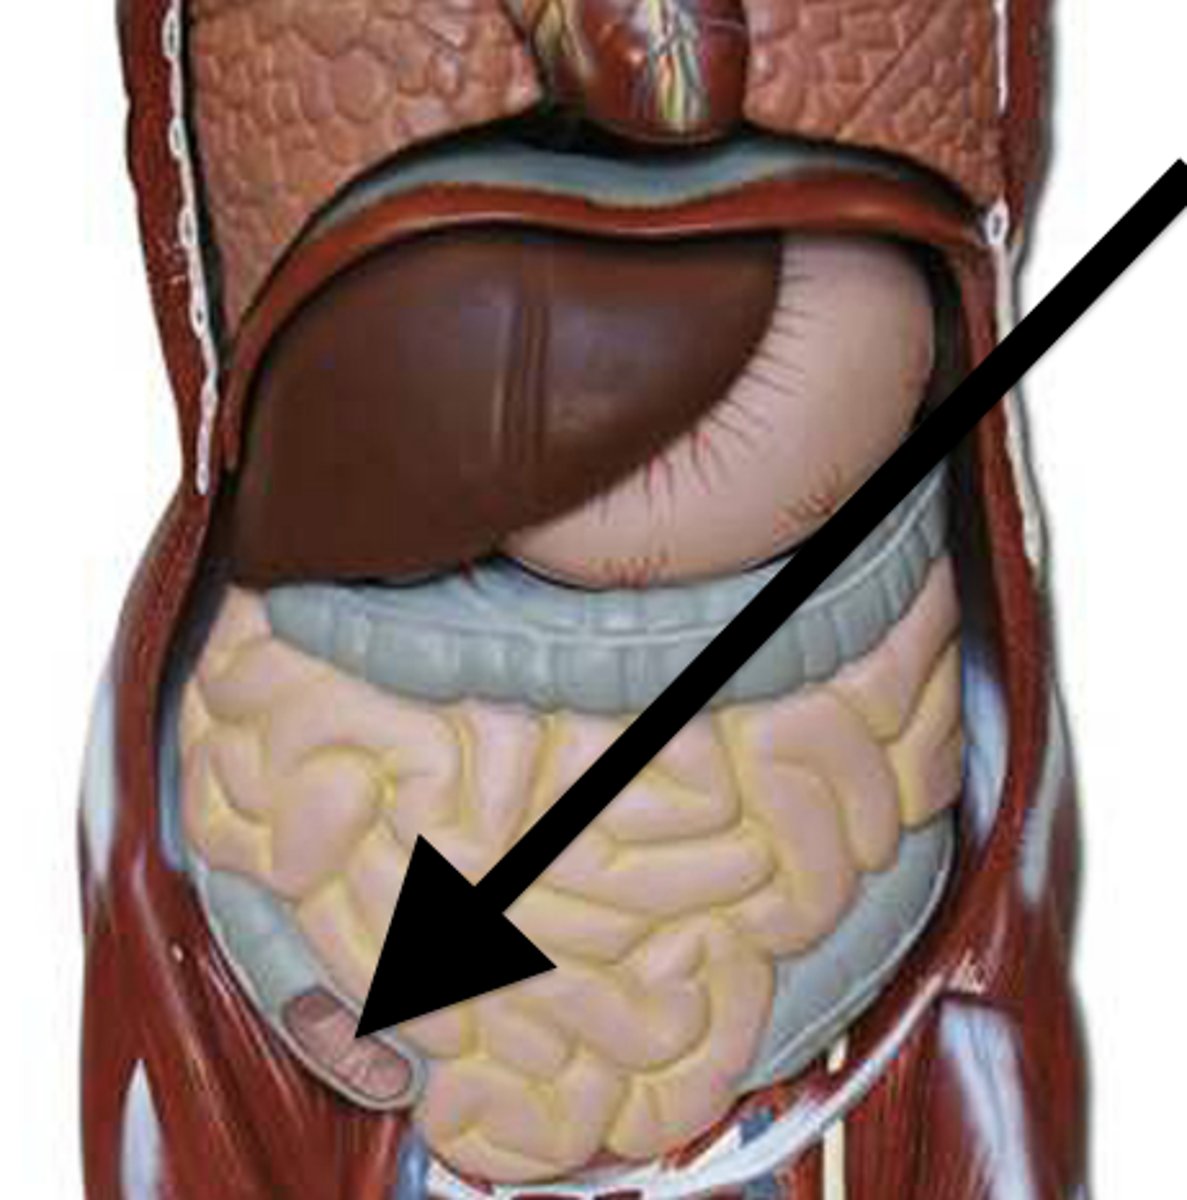 <p>The appendix is located on the inferior aspect of what part of the large intestine?</p>